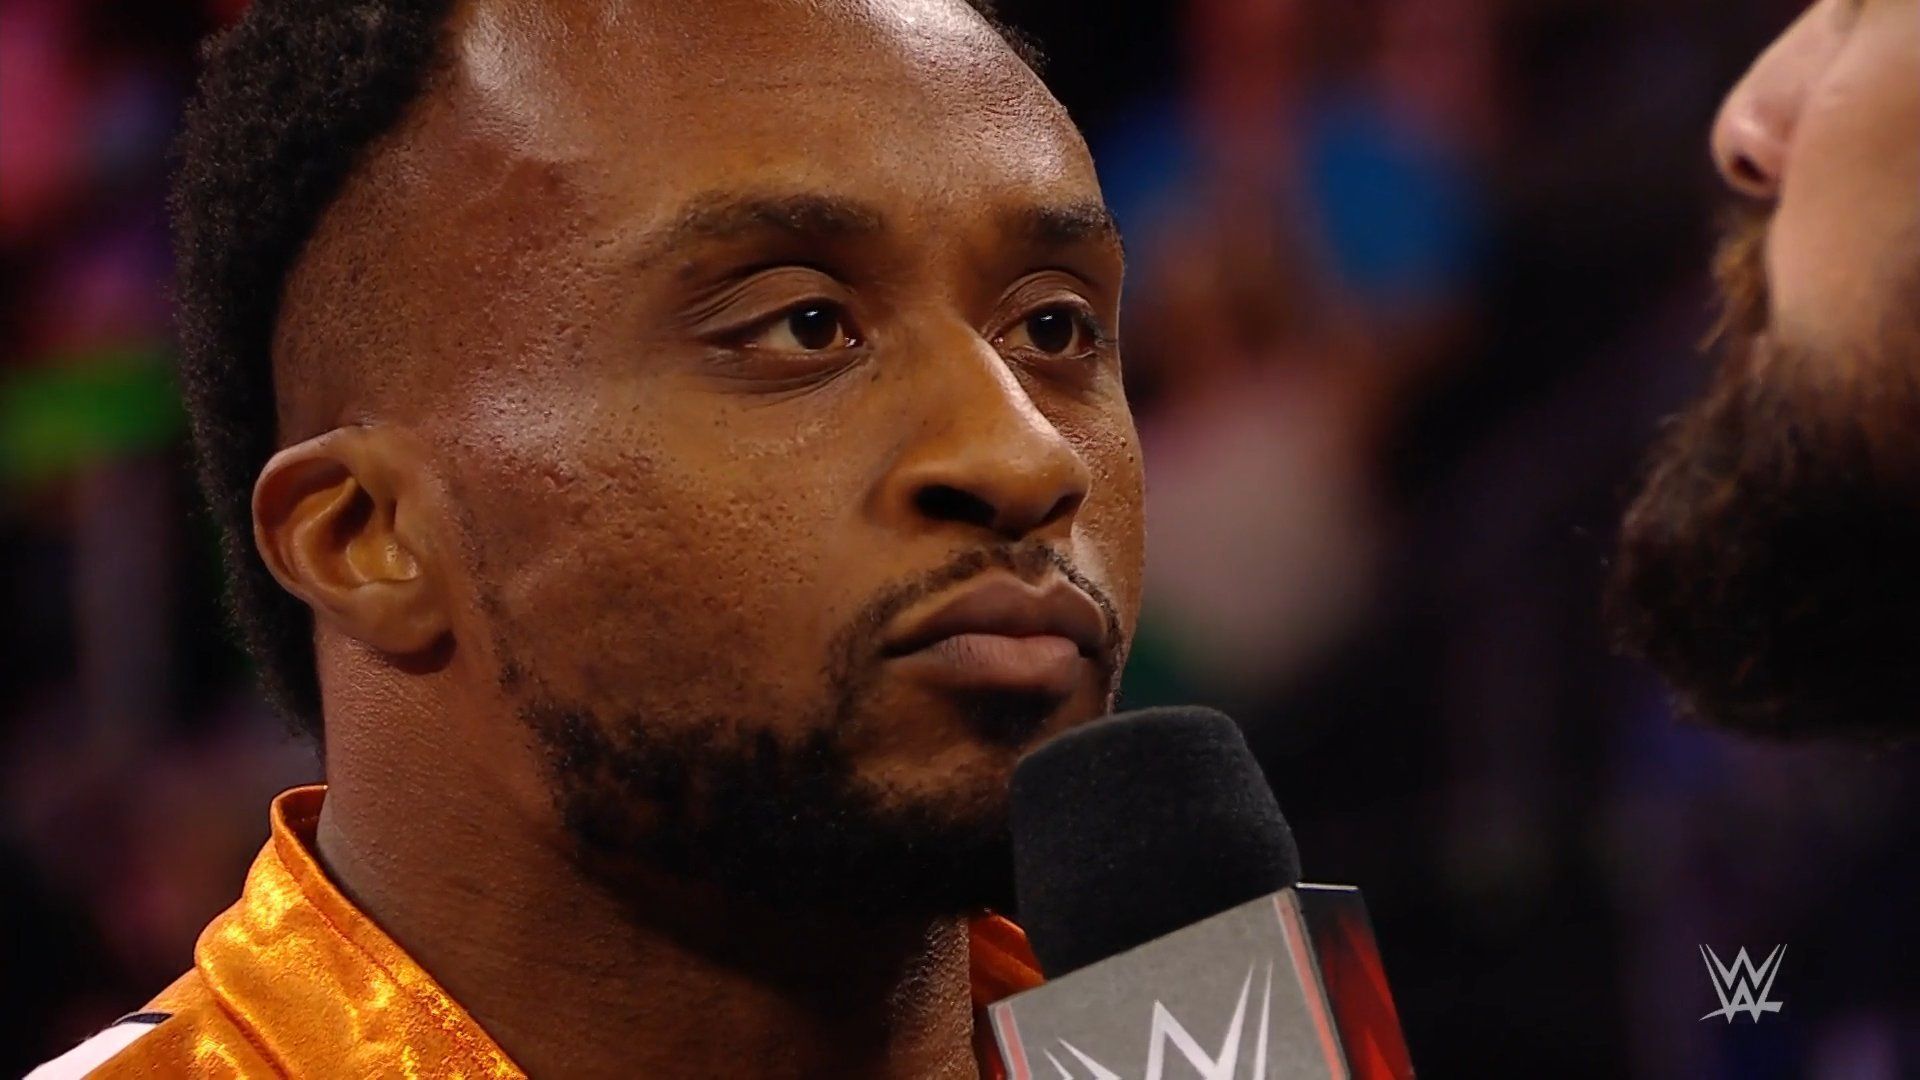 Big E told Seth Rollins to give respect to Kofi Kingston and King Xavier on RAW